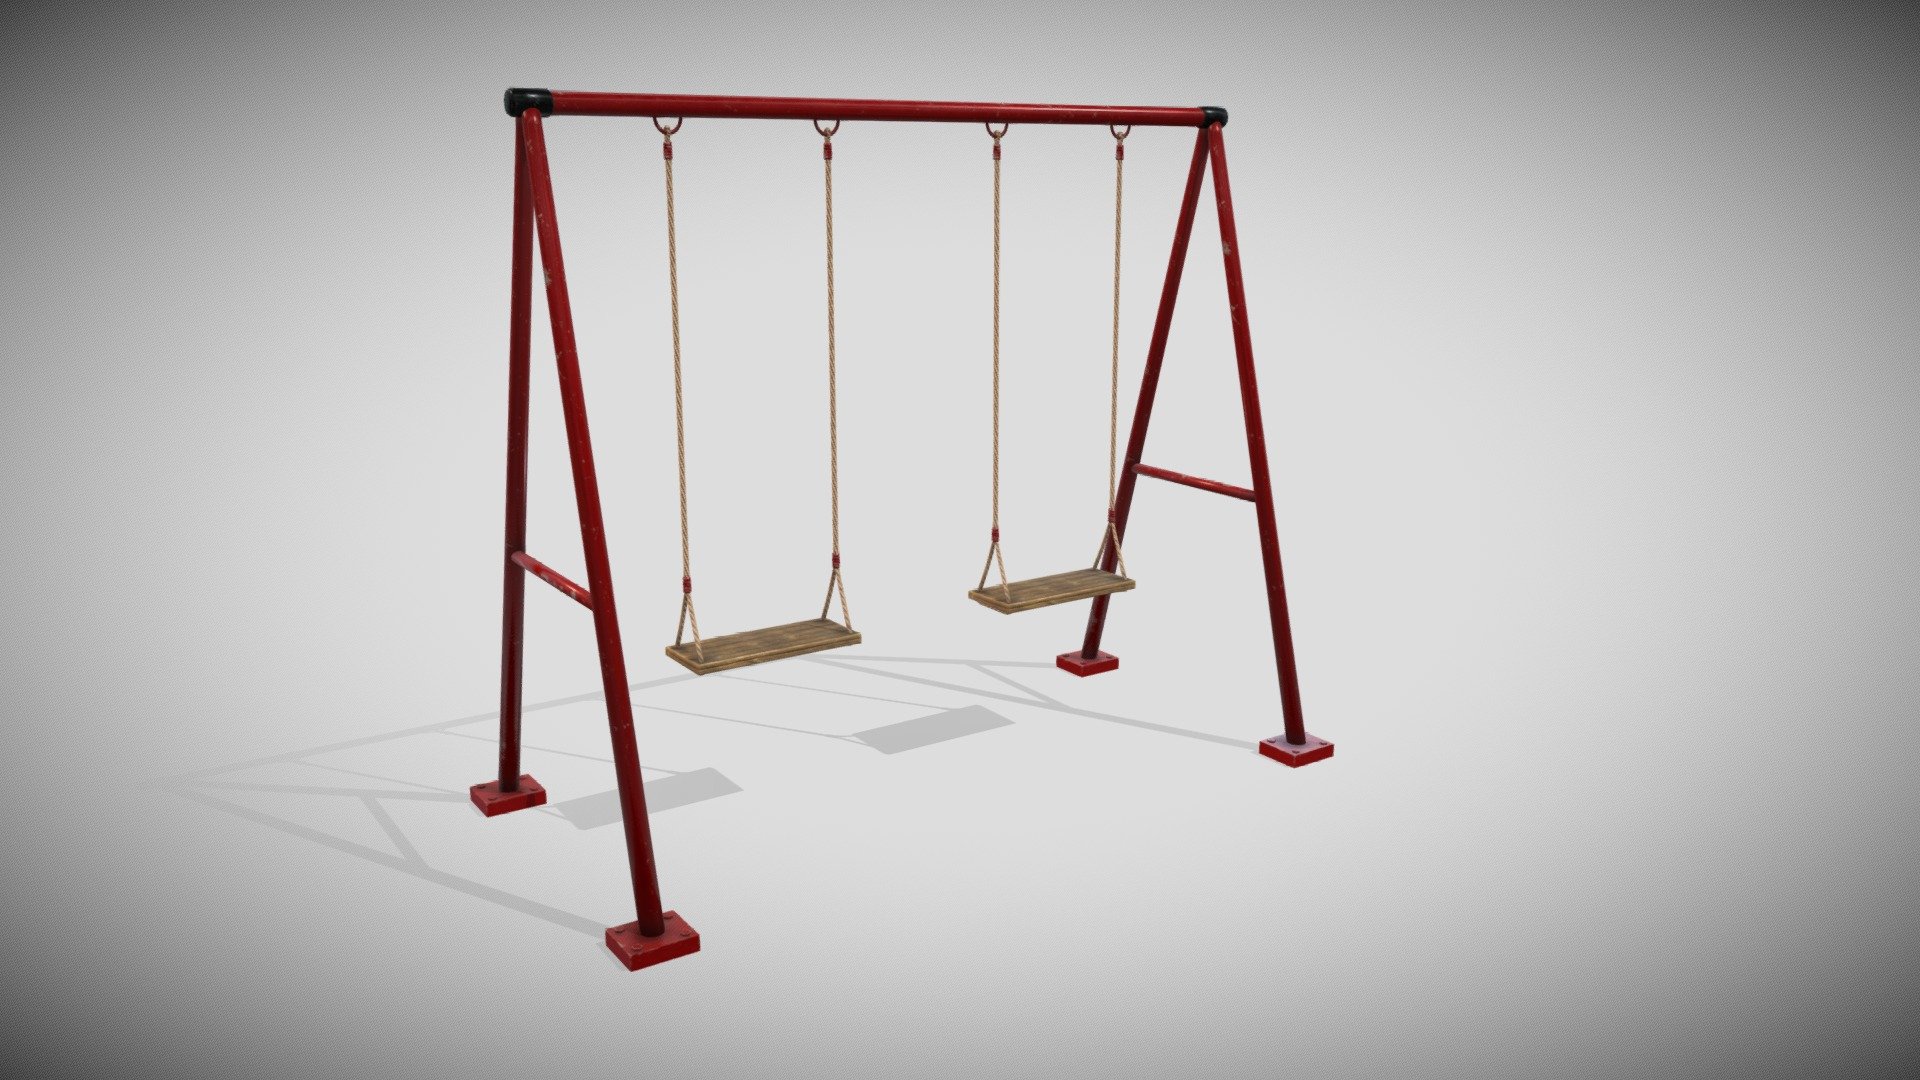 A simple animated playground swing. 
PBR Materials, game ready - Playground swing - 3D model by Sergio Delacruz (@killah81) 3d model